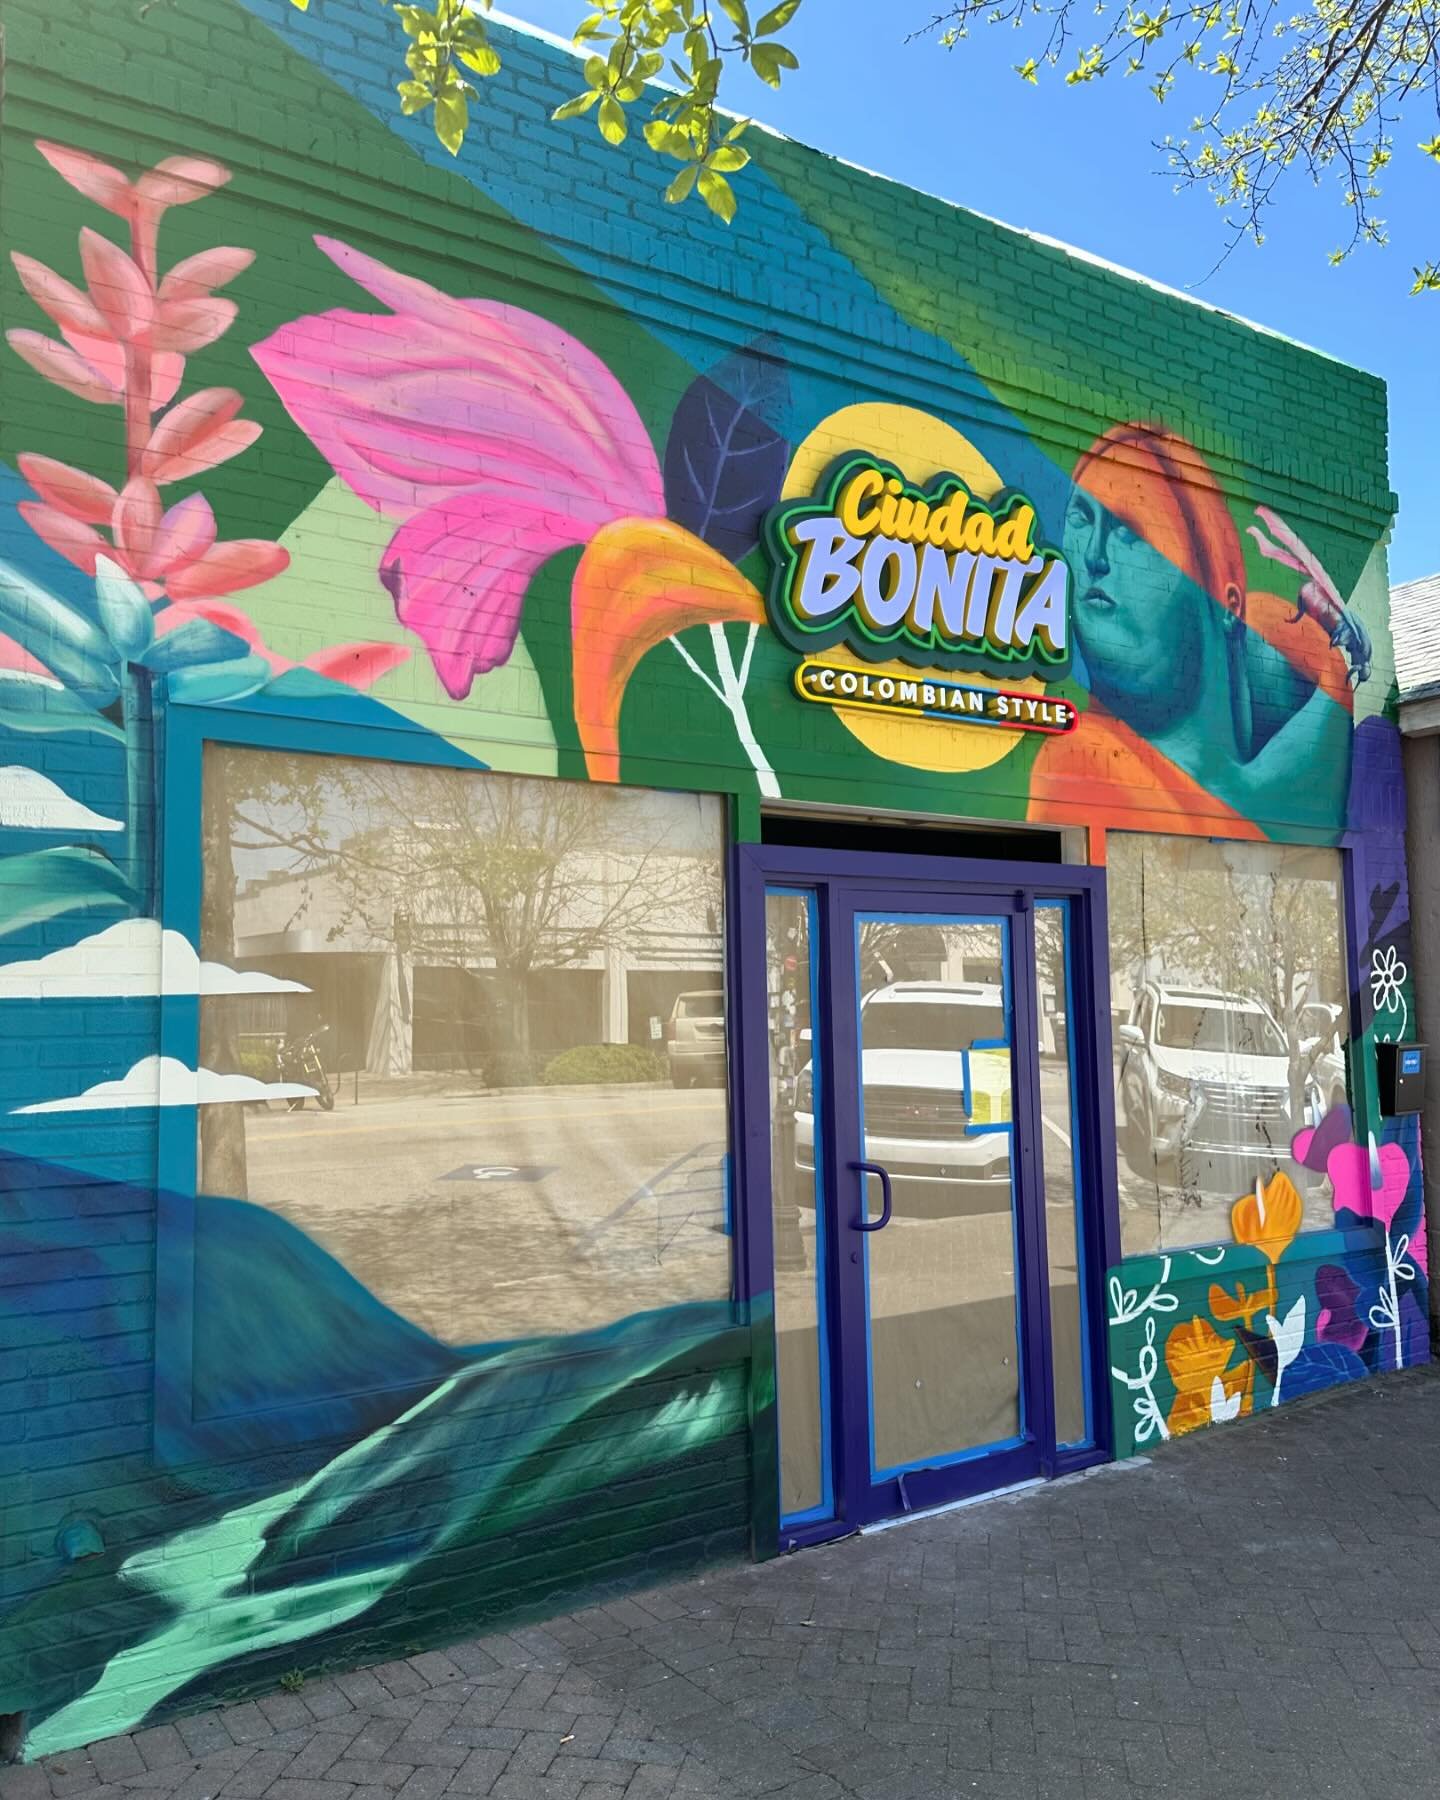 Finally posting this mural for @ciudadbonitachs in Park Circle! I wanted to wait until they had their sign installed to complete the mural. Gonna be a cool spot so make sure to check them out when they&rsquo;re open 🤙🏼
-
Design: @soypdart 
Painted 